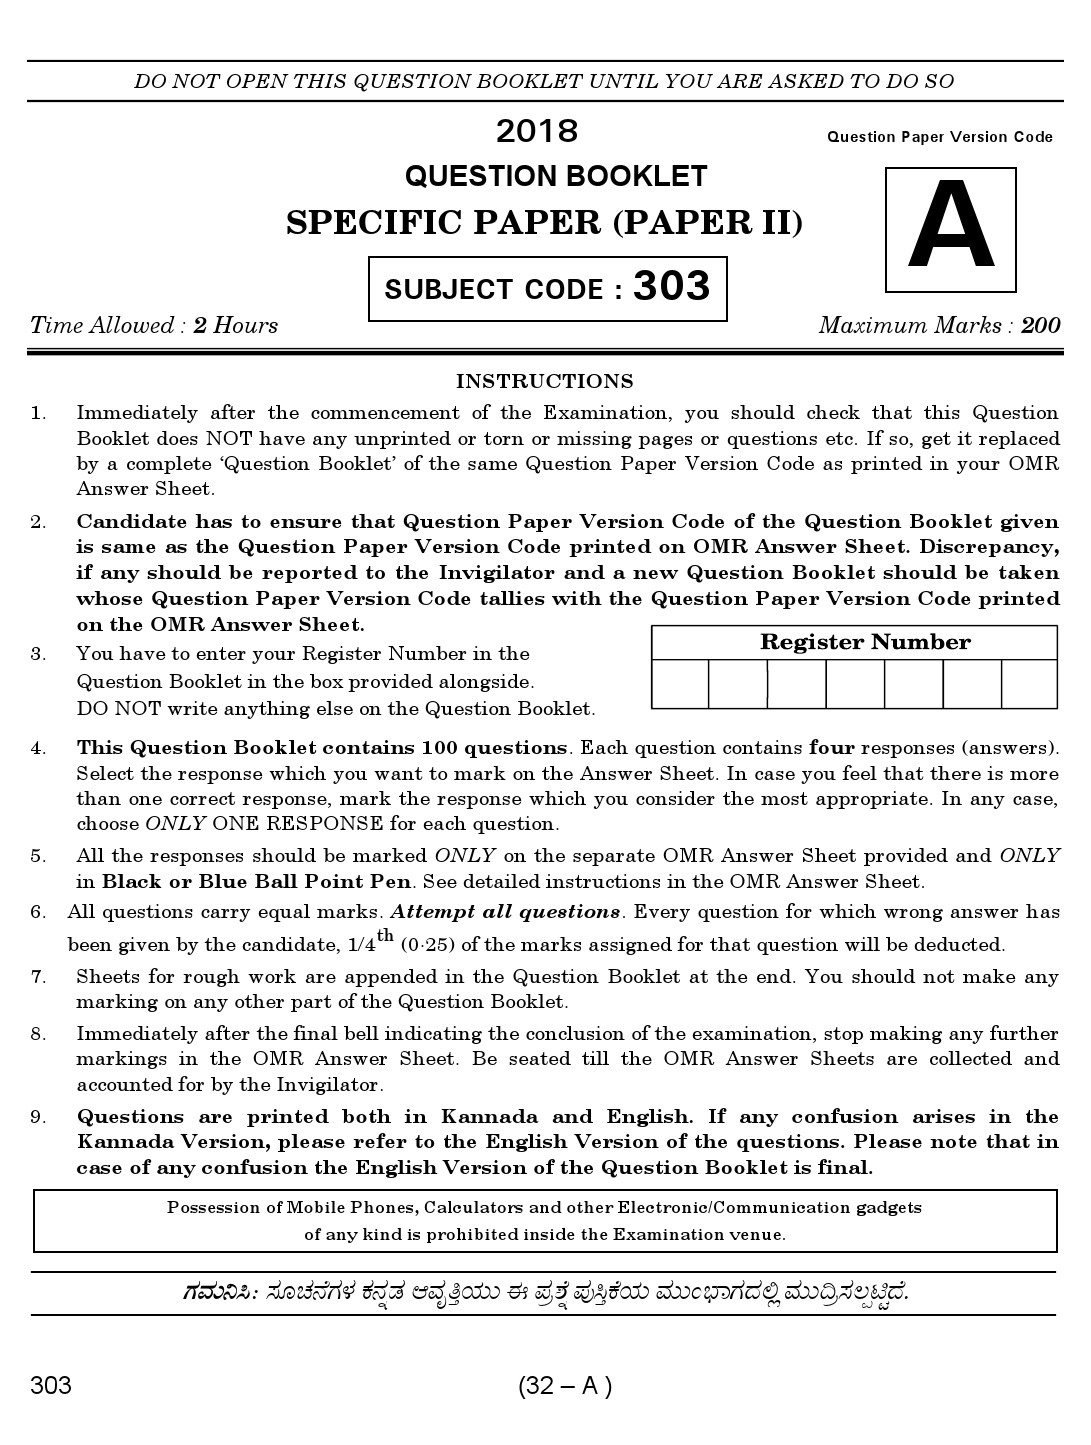 Karnataka PSC 303 Specific Paper II Librarian Exam Sample Question Paper 1